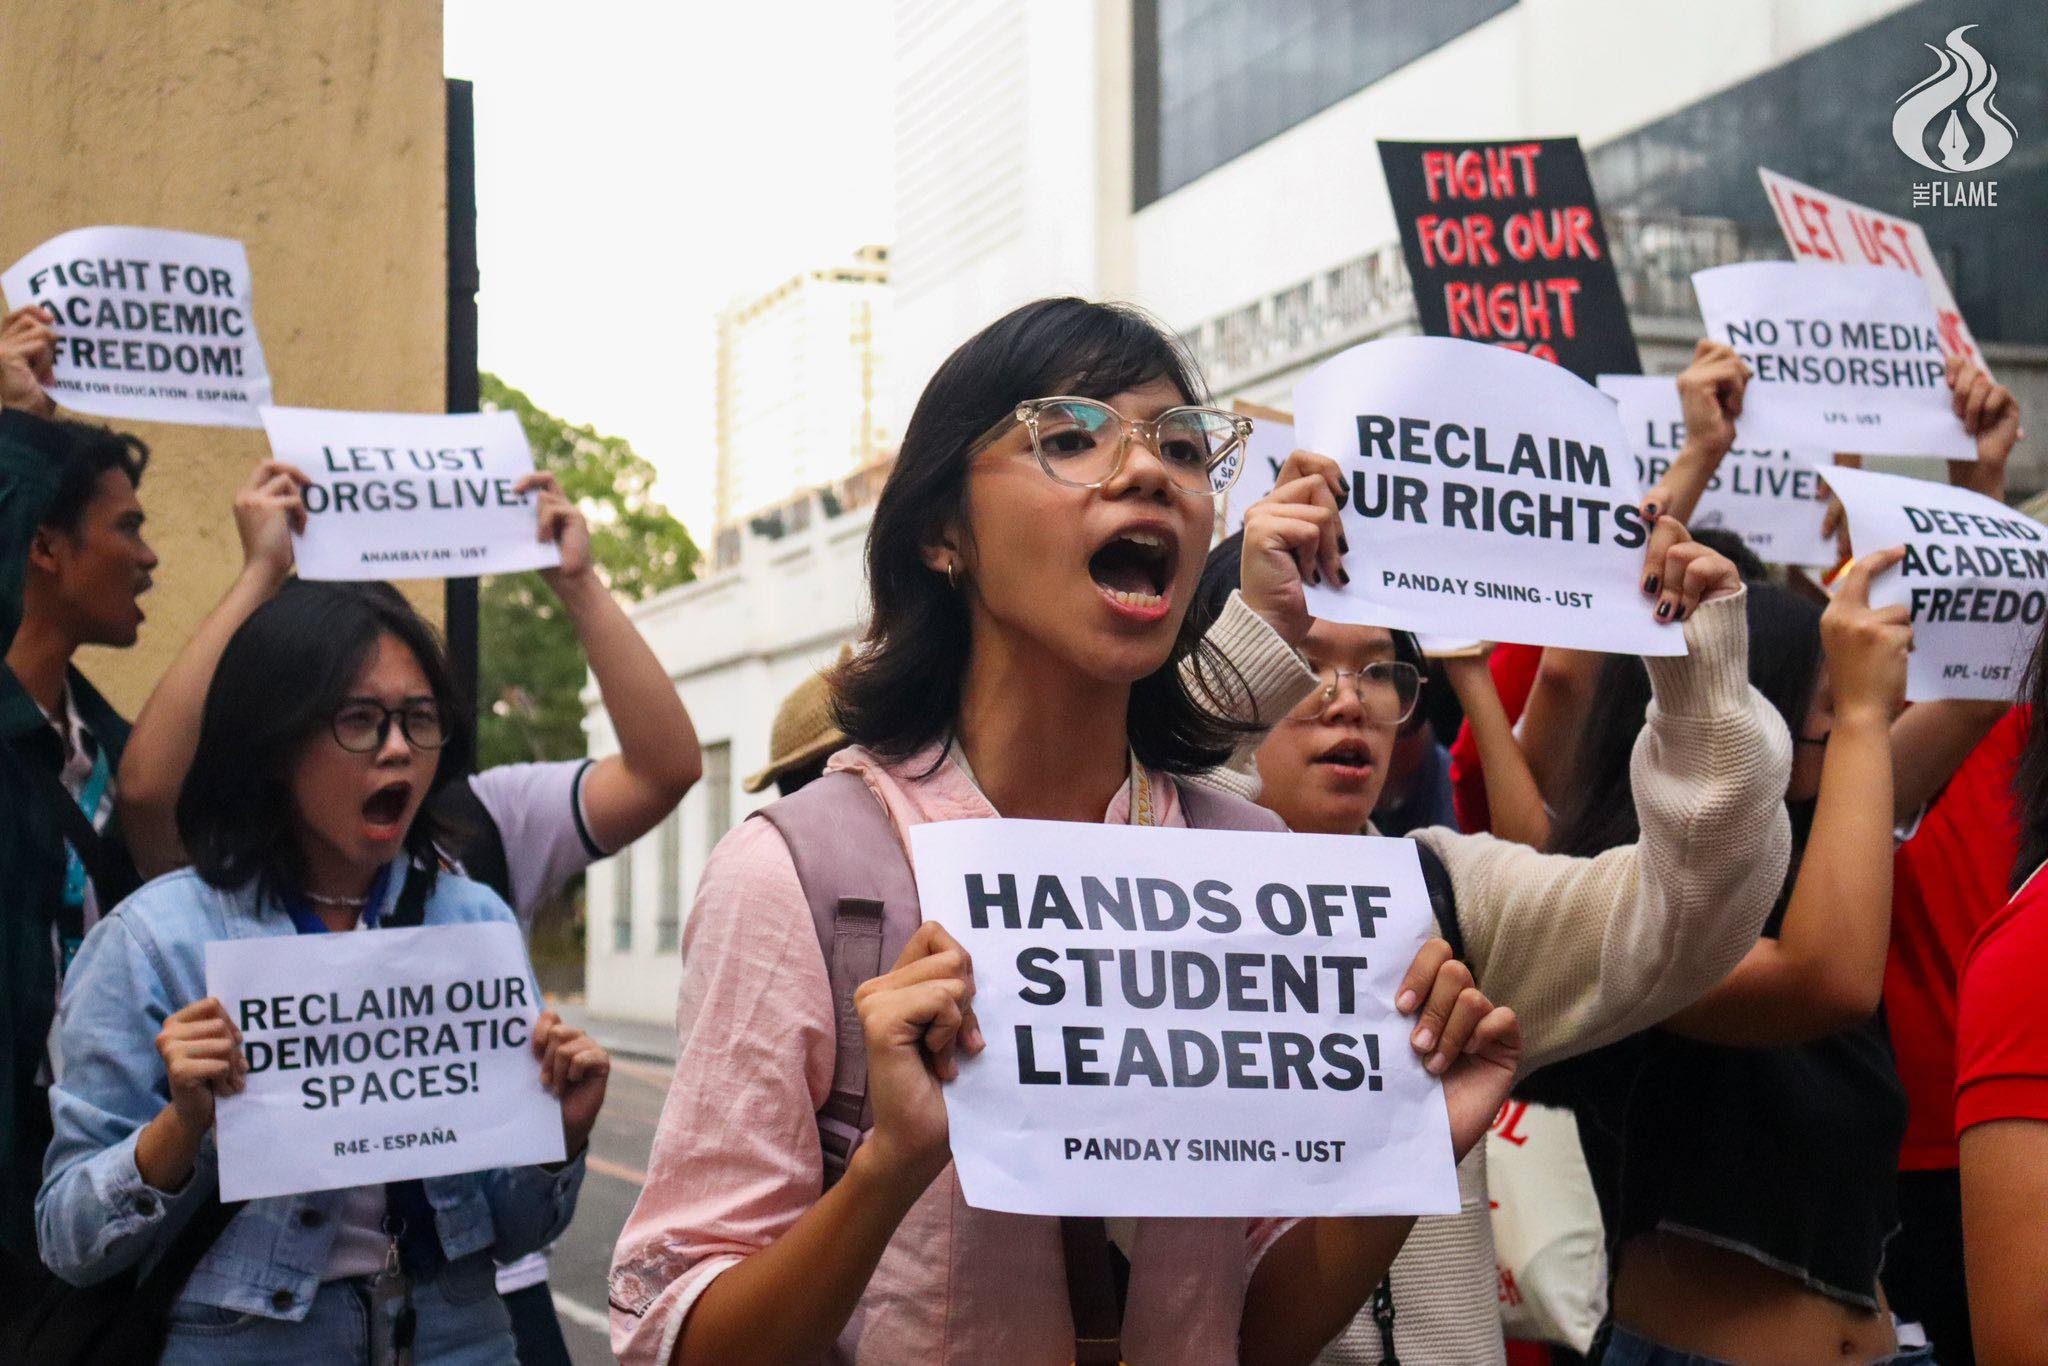 Thomasian student activist receives show-cause letter from UST administration